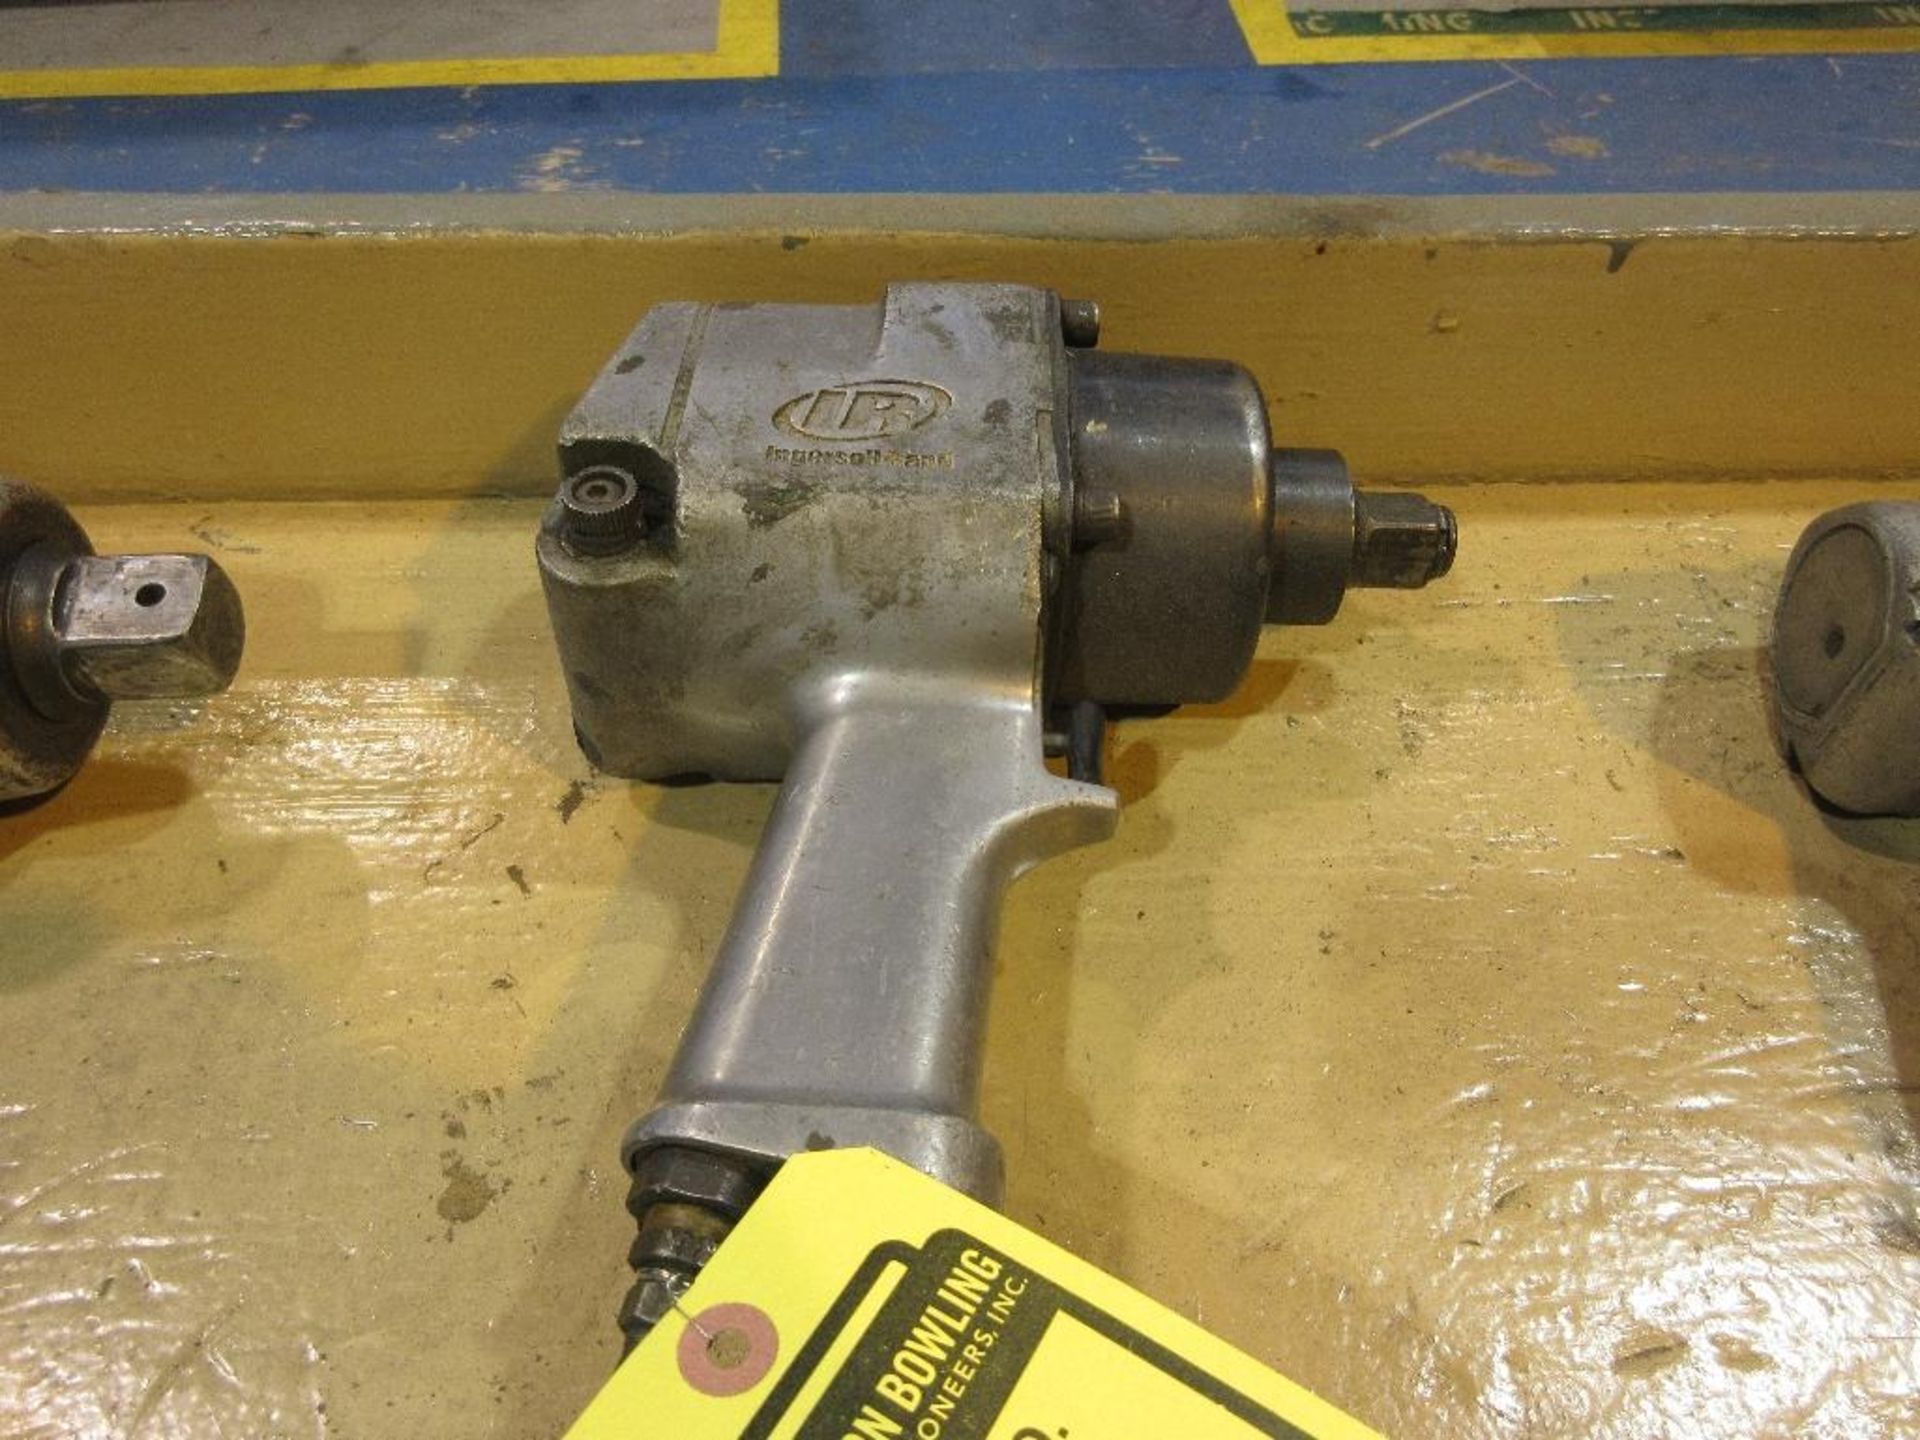 INGERSOLL RAND 3/4 IN. PNEUMATIC IMPACT WRENCH